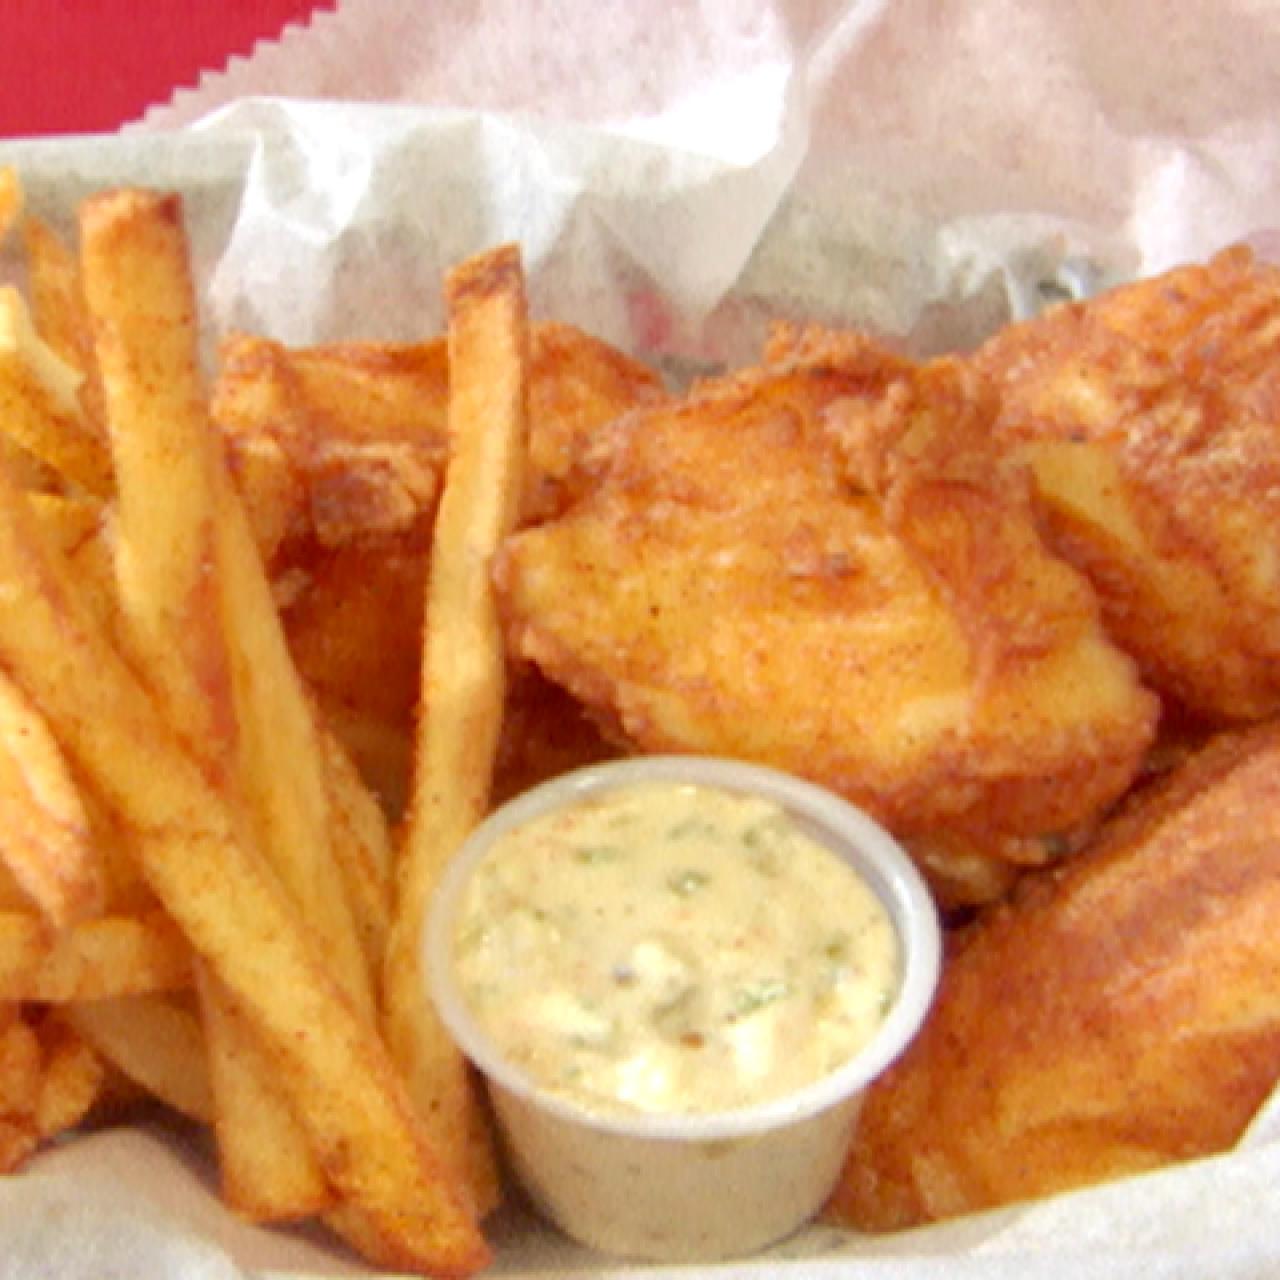 Beer Batter Fish and Spicy Chips with Lemon-Habanero Tartar Sauce